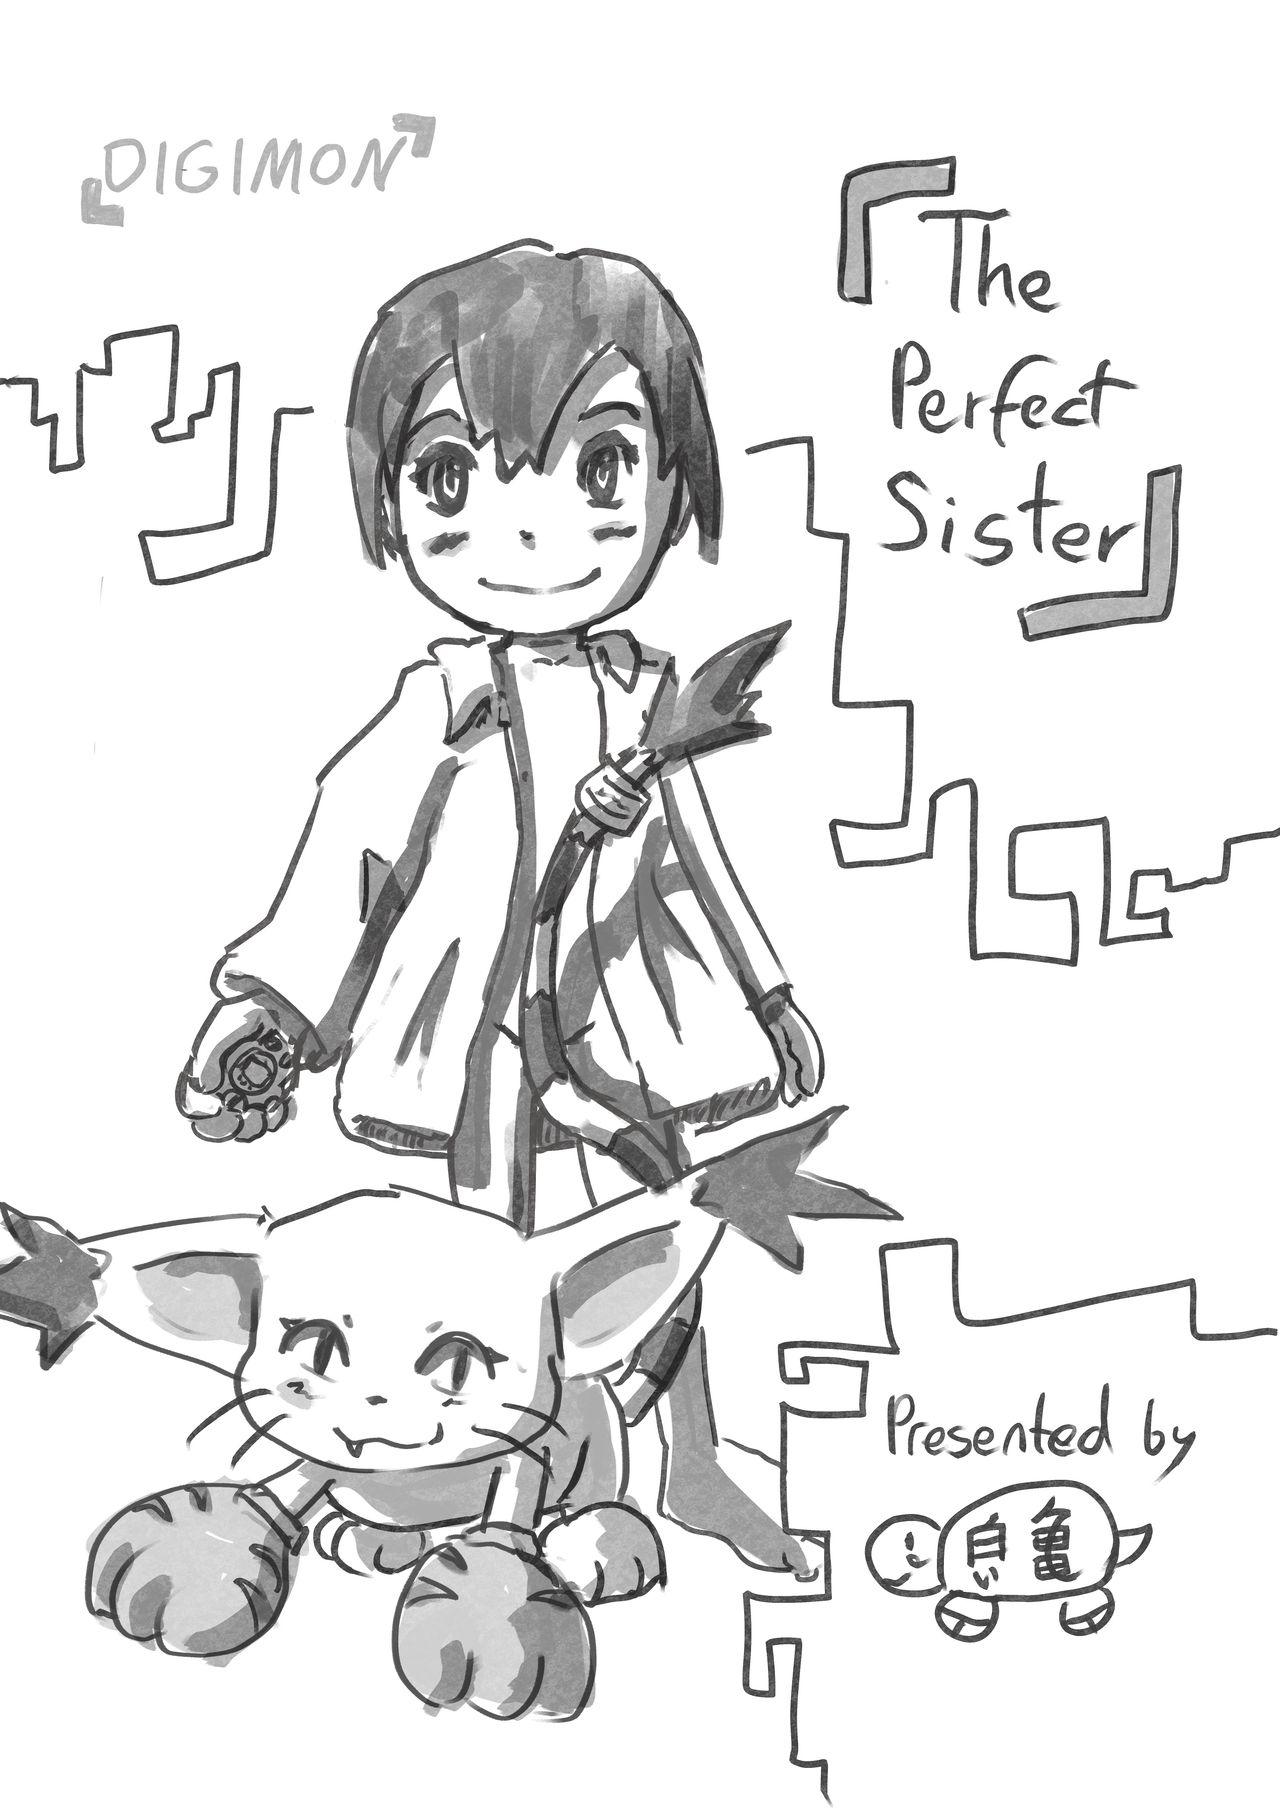 The perfect Sister 0